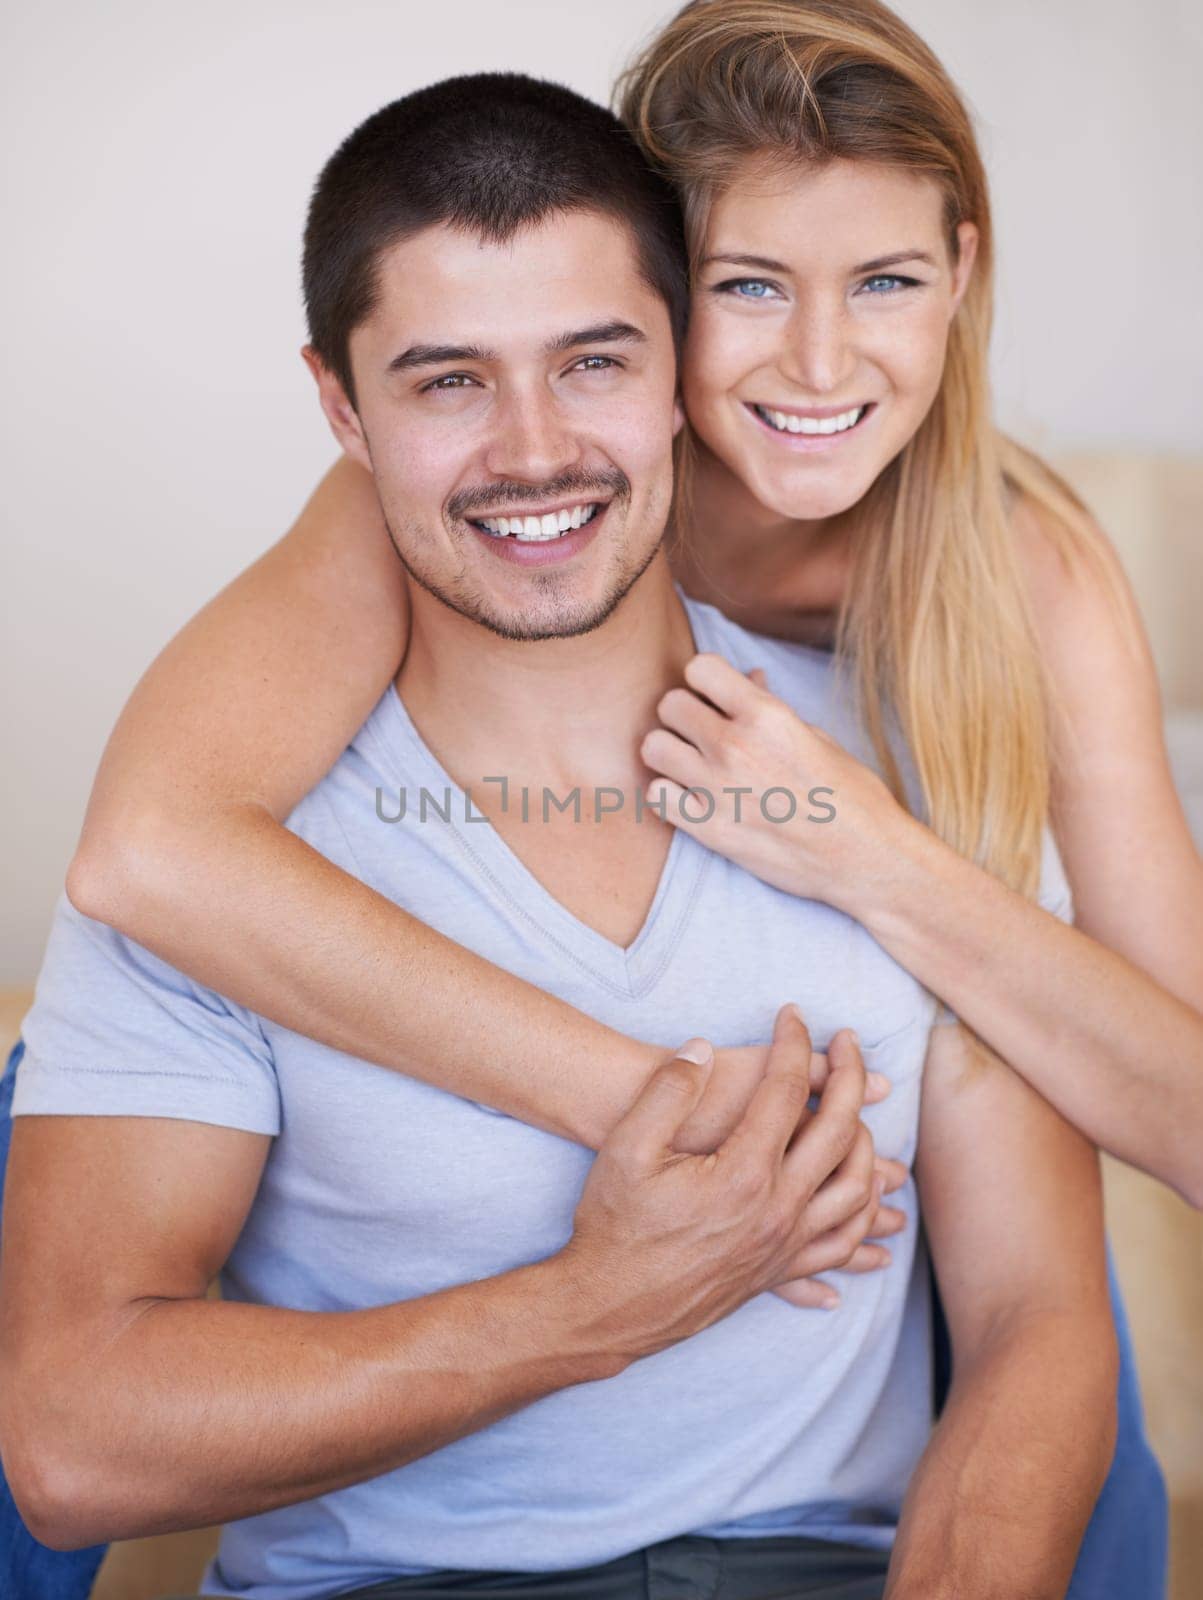 Young and in love. Attractive young couple relaxing together happily at home